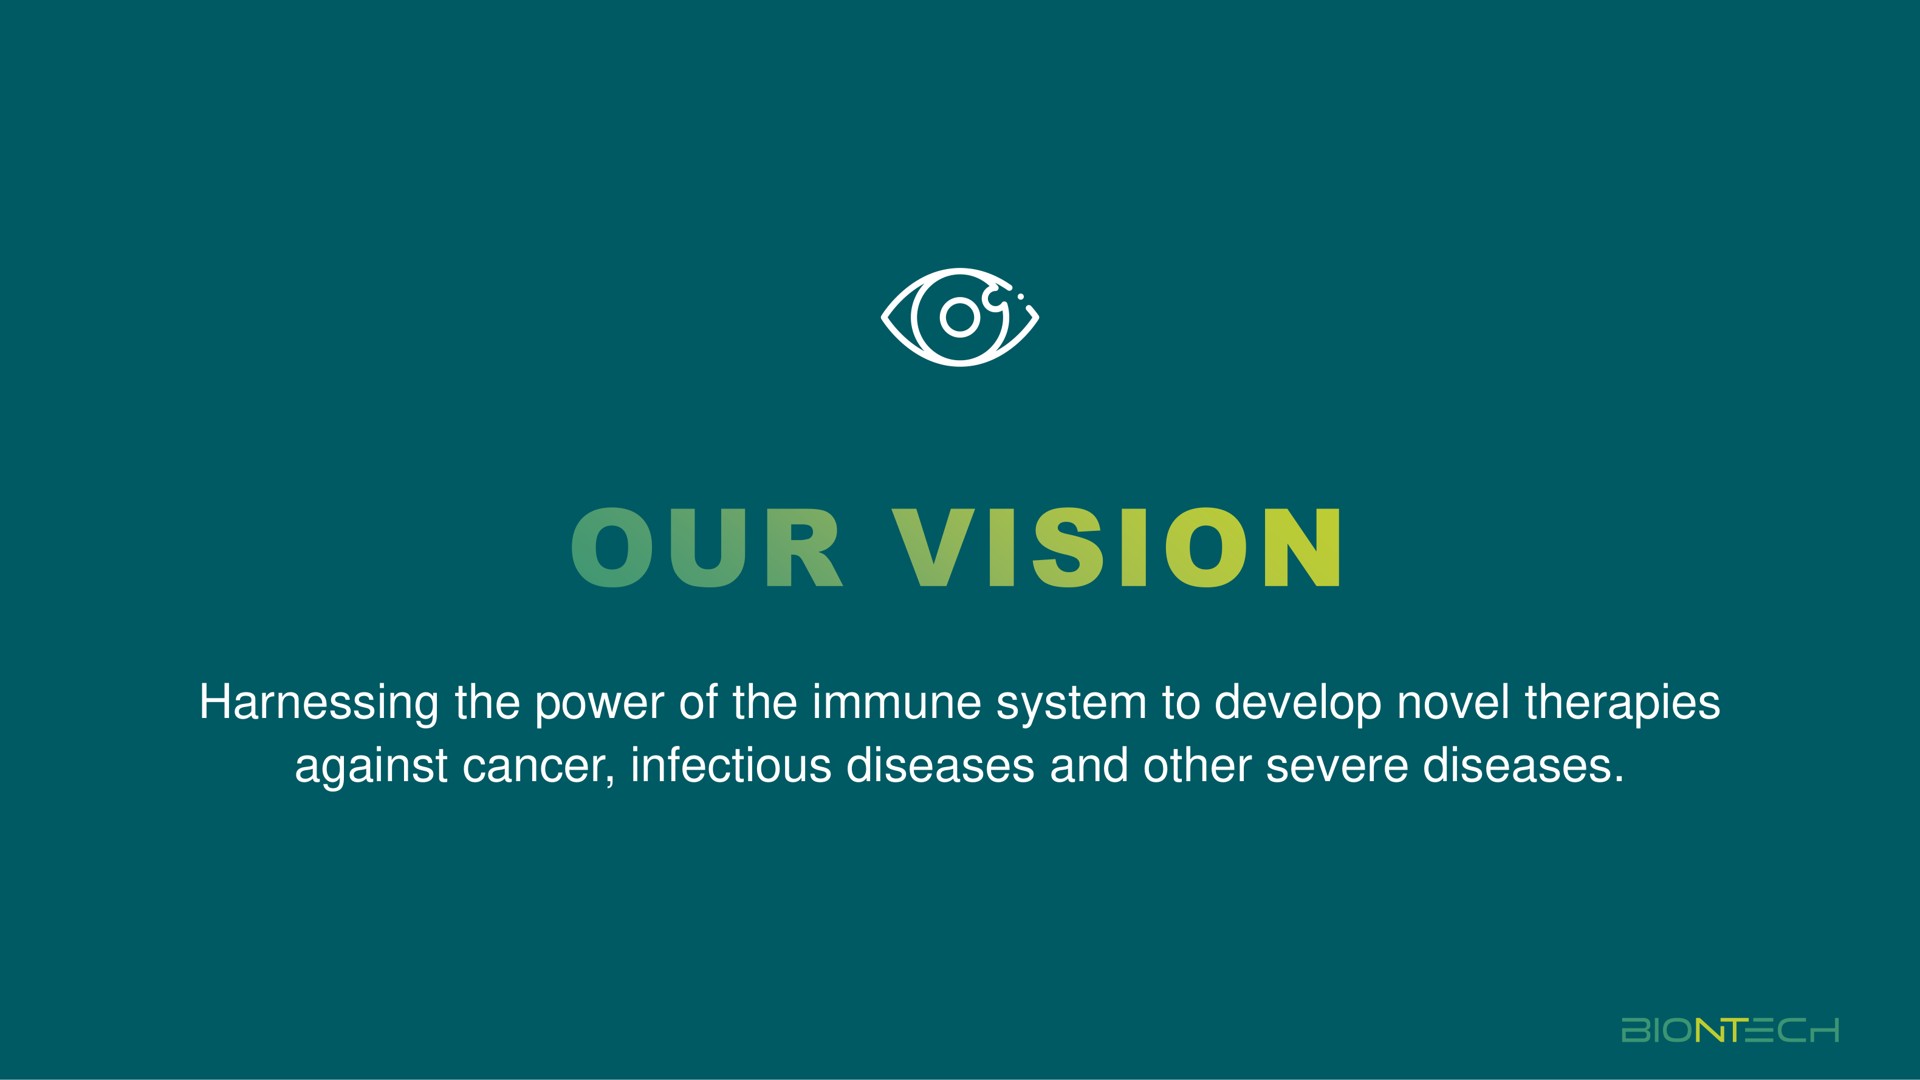 harnessing the power of the immune system to develop novel therapies against cancer infectious diseases and other severe diseases vision | BioNTech